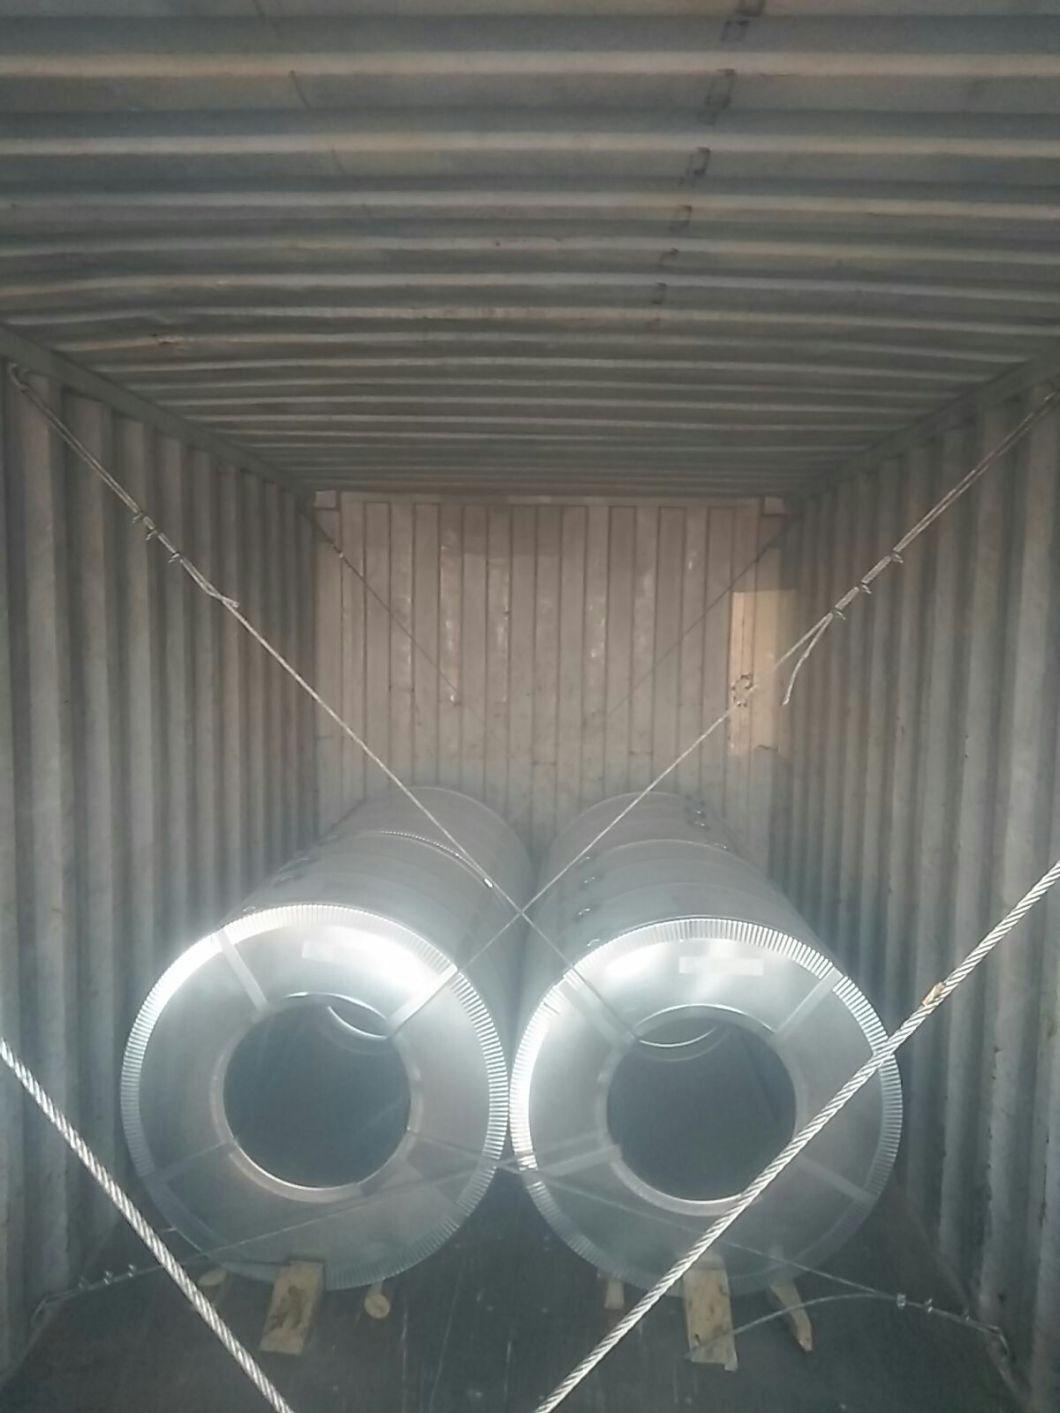 0.16-2.0mm*914-1250mm Hot Dipped Galvanized Steel Sheets in Coils